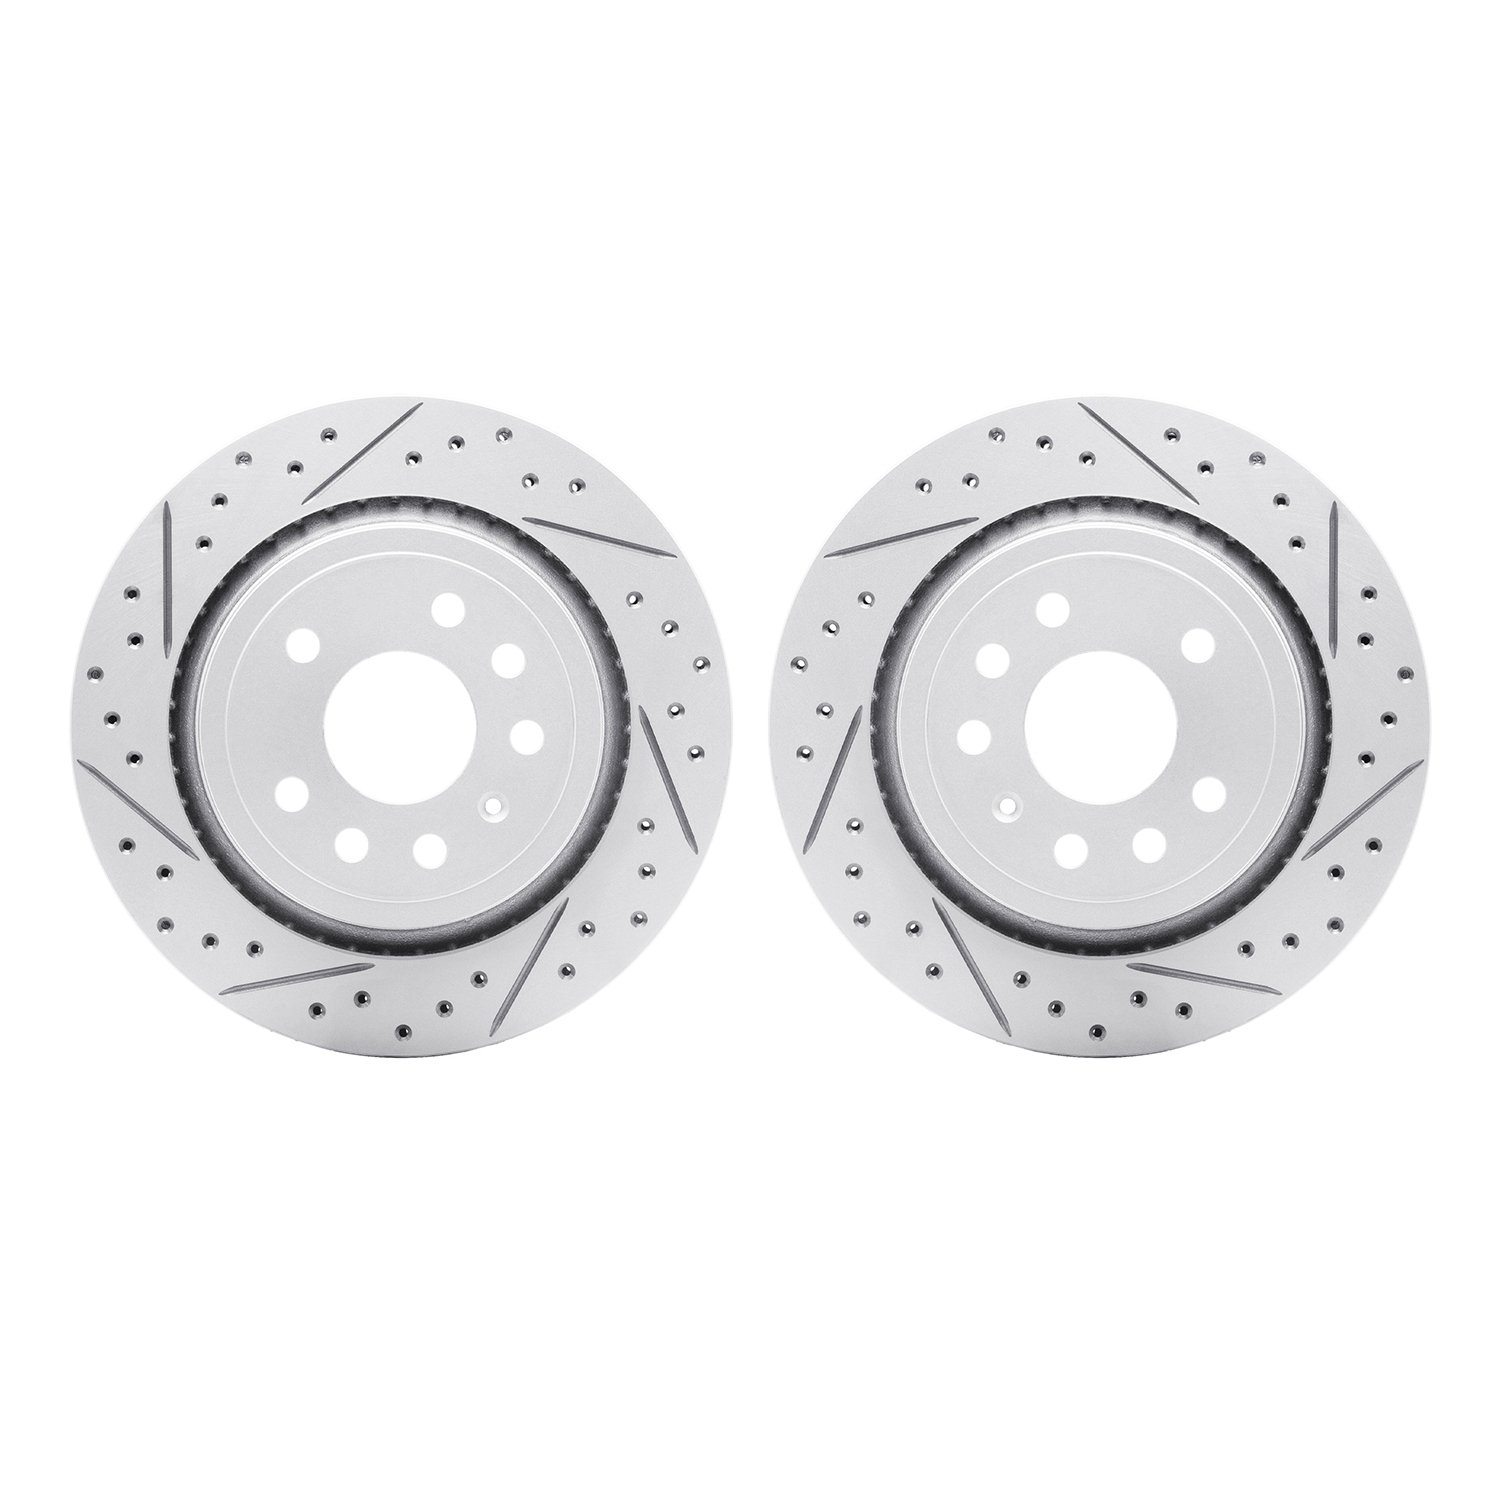 2002-65010 Geoperformance Drilled/Slotted Brake Rotors, 2003-2011 GM, Position: Rear